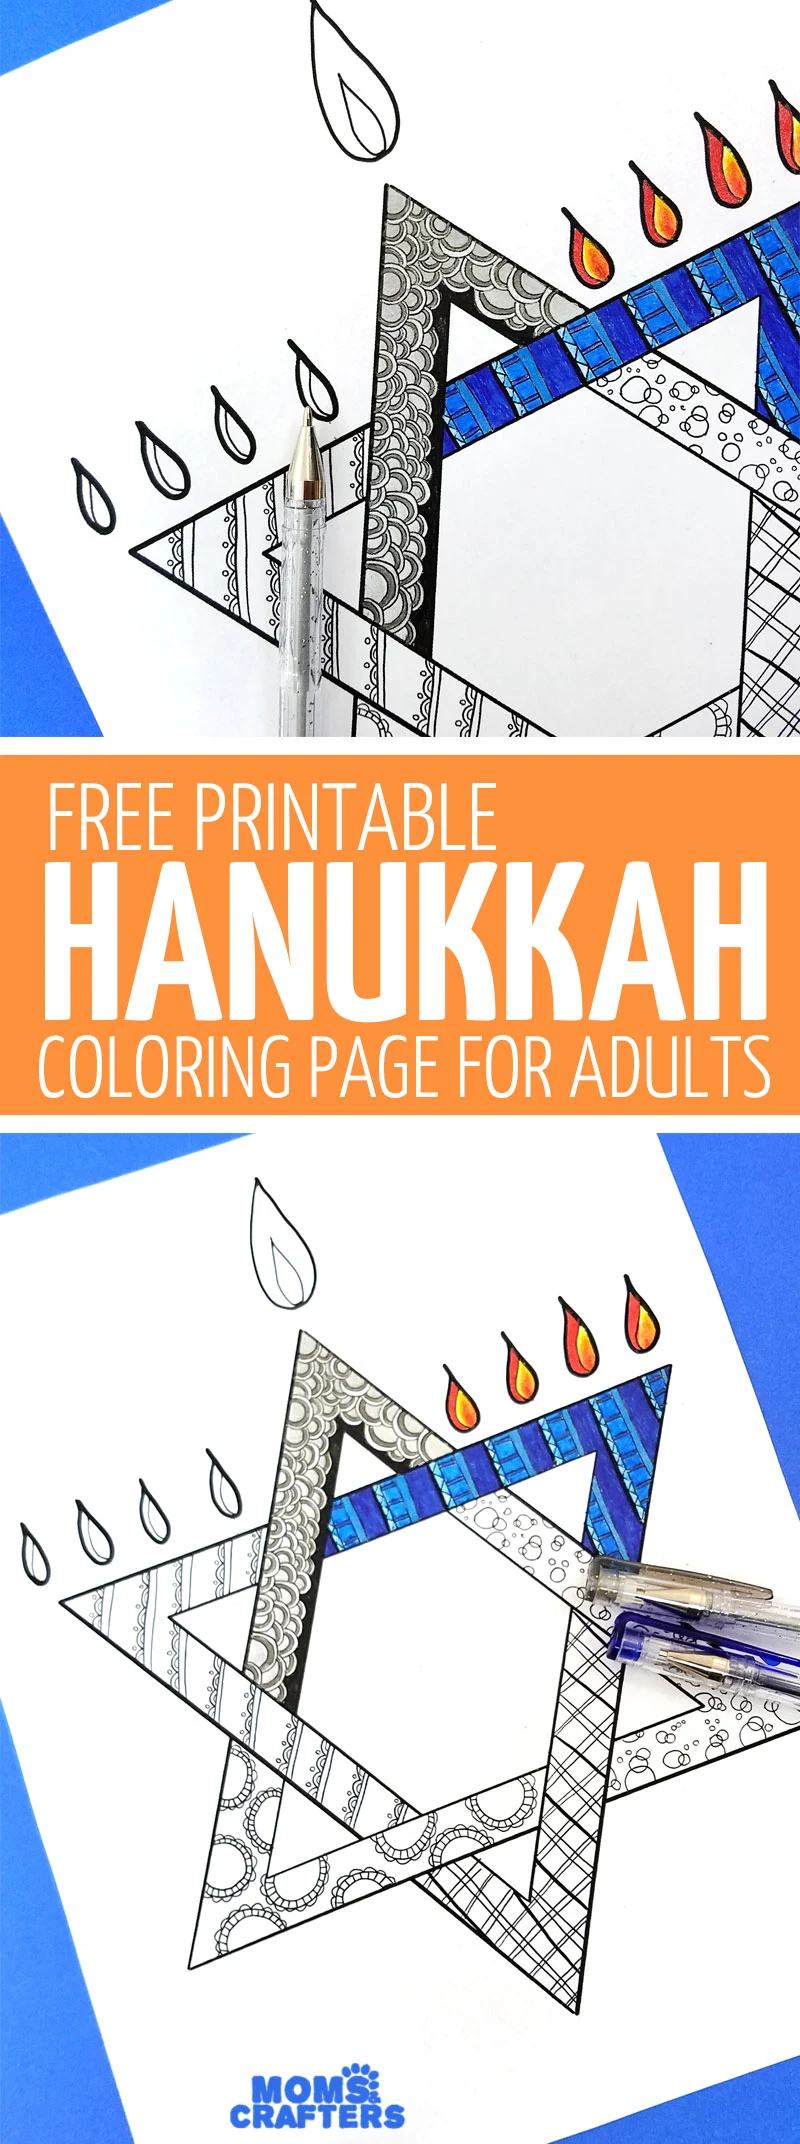 This free printable Hanukkah coloring page for adults is a great Hanukkah activity or craft! Engage the grown-ups at your Chanukah party, use it as Hannukah decor or just unwind with it over a plate of latkes!